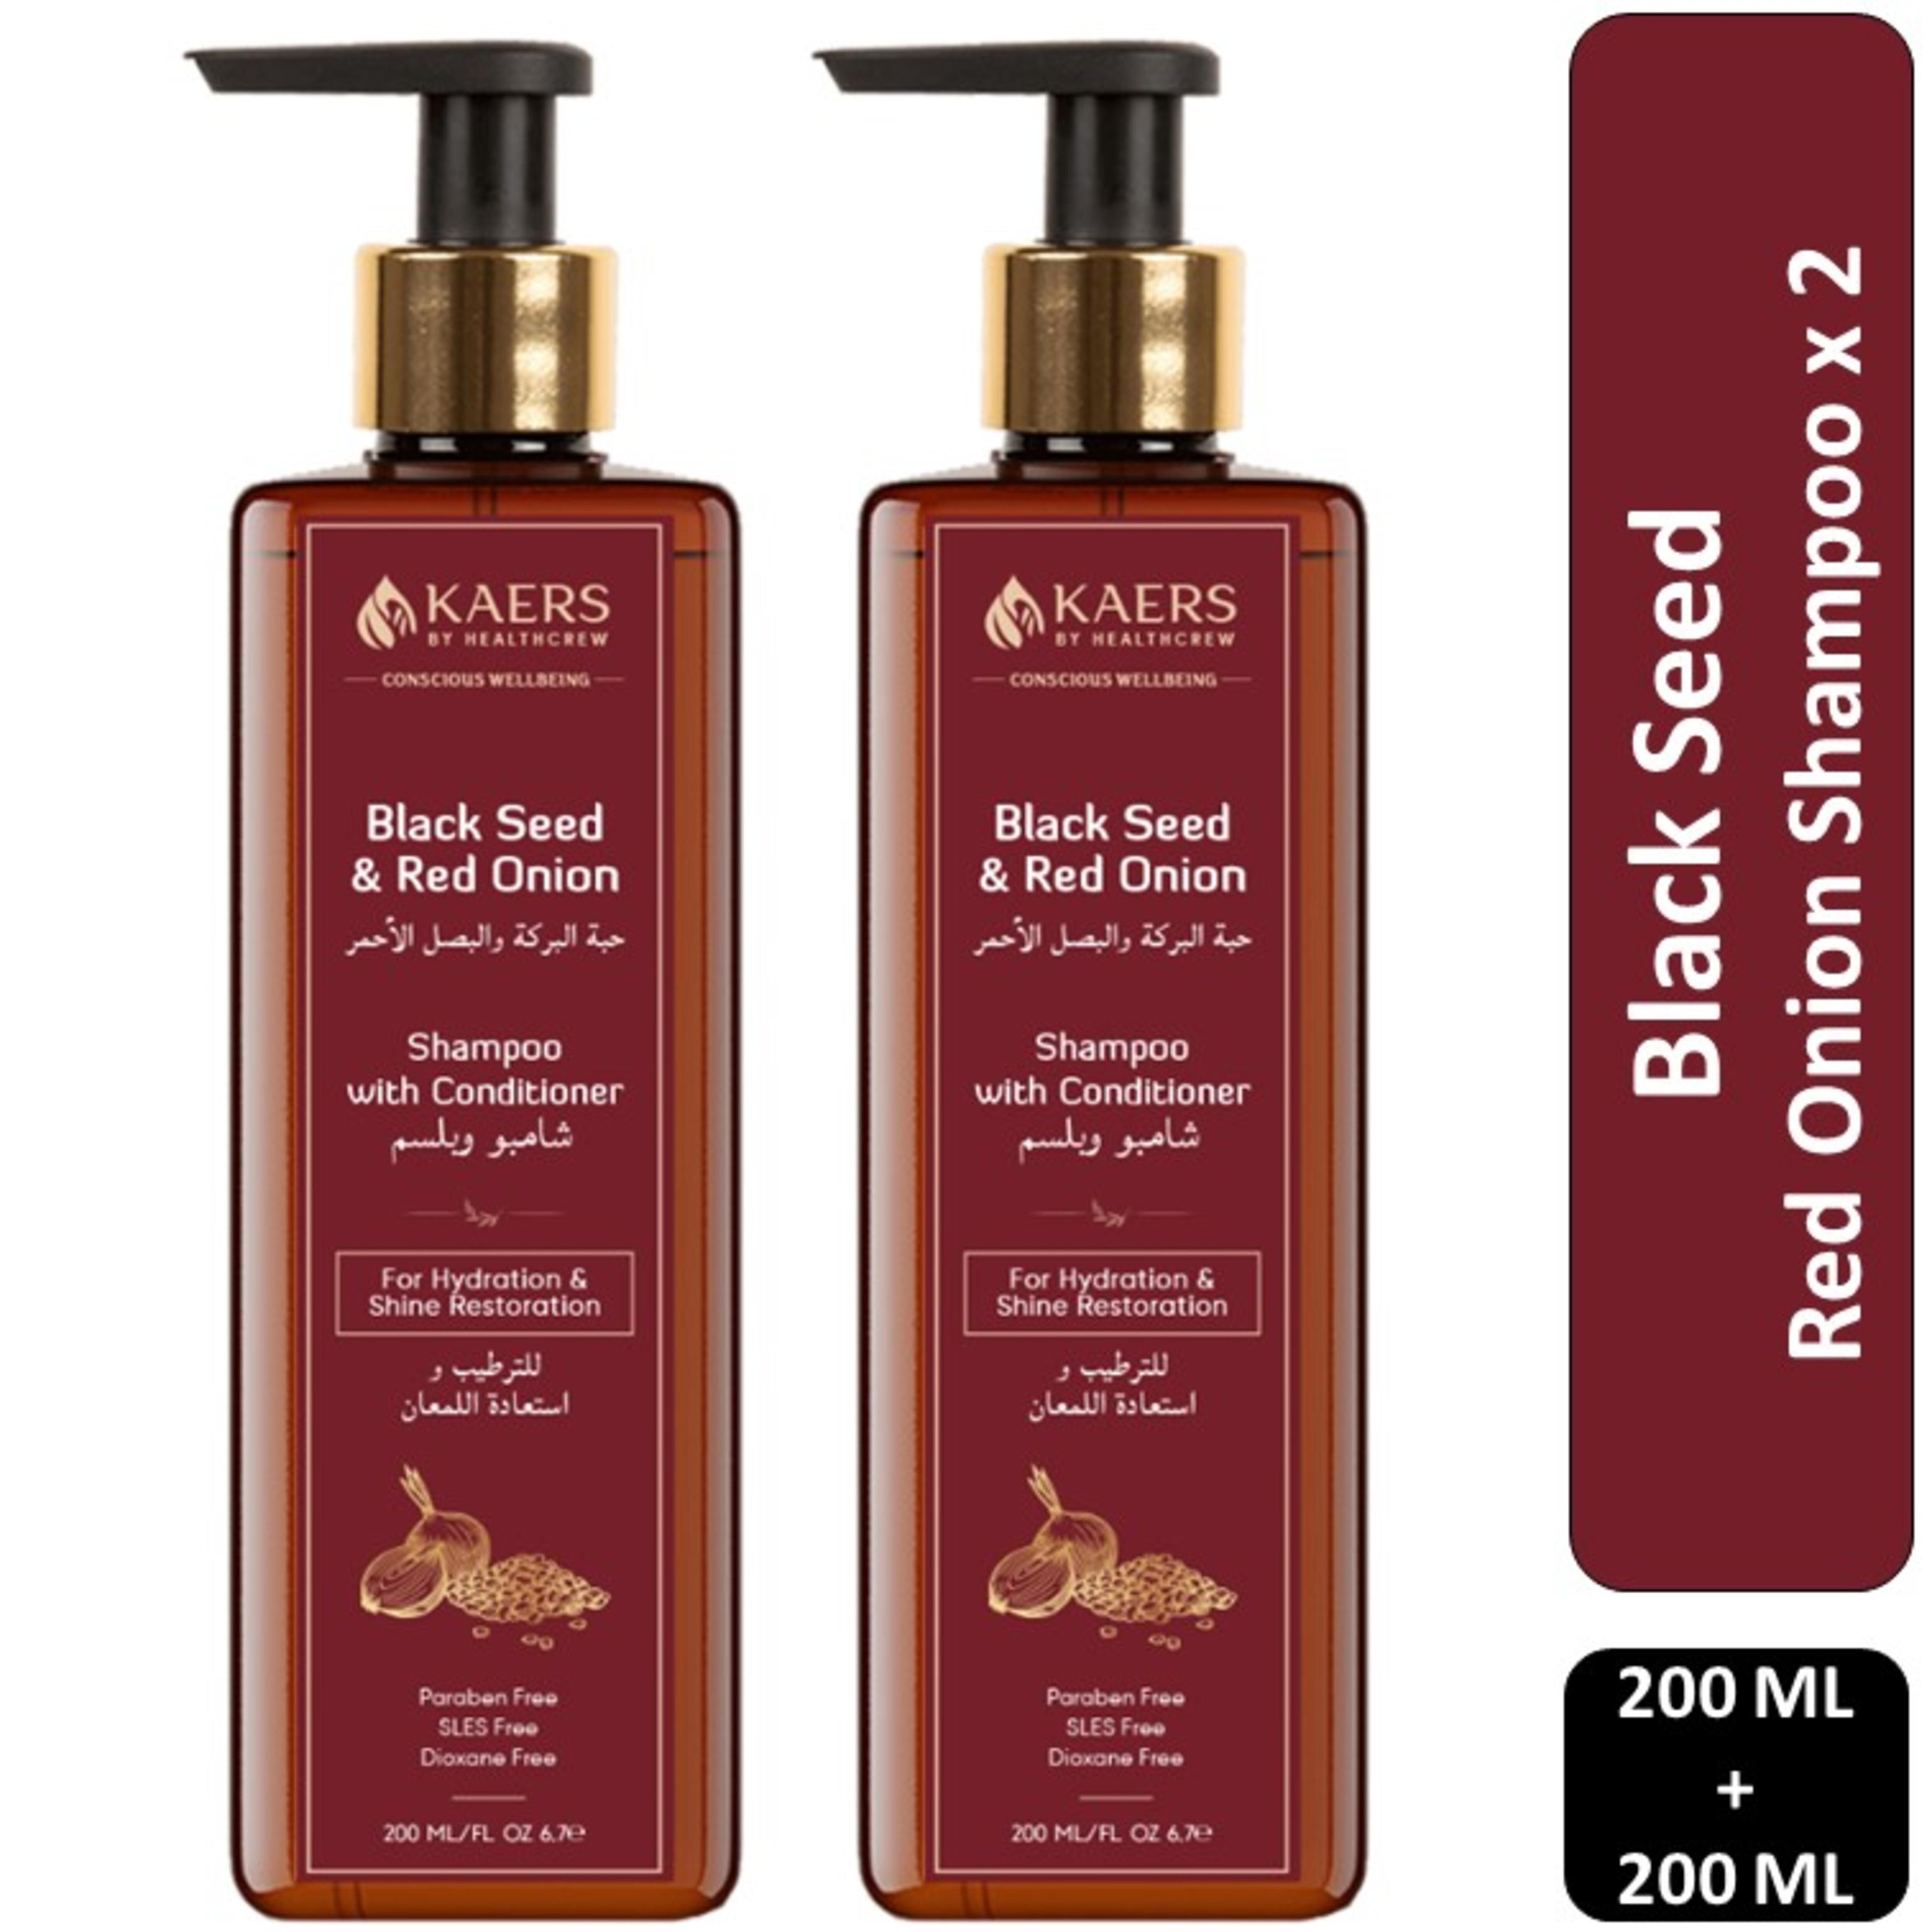 Kaers Kalonji Herbal Shampoo | Black Seed and Red Onion | Shampoo With  Conditioner | Paraben Free, SLES Free, Dioxane Free | Hydration and Shine  Restoration | For All Hair Type |